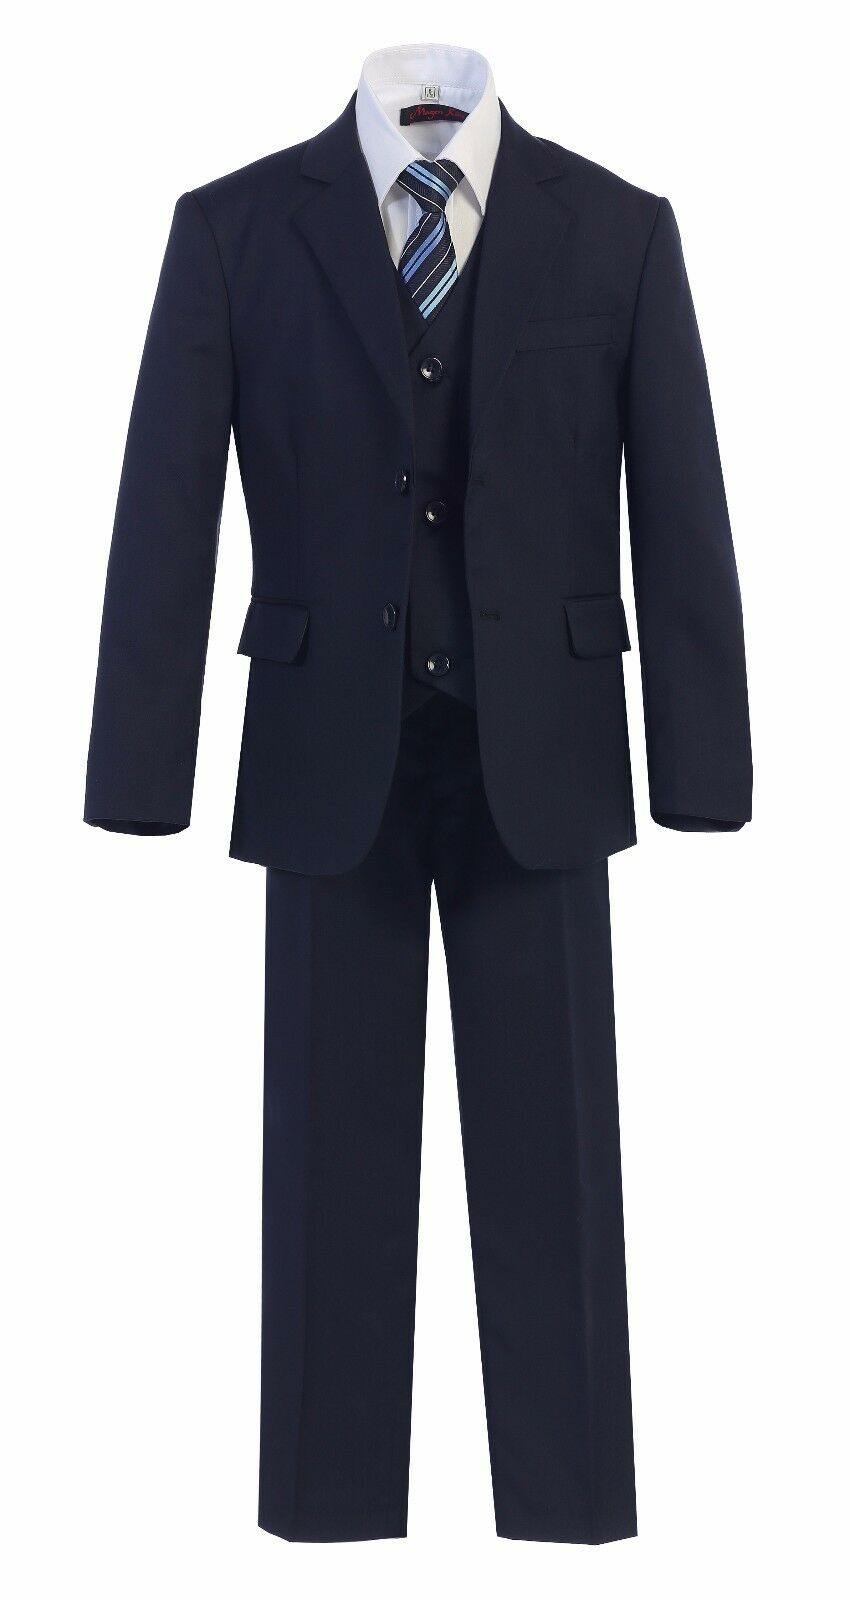 A boy's charm is accentuated in the rich silhouette of an Executive Navy Suit.